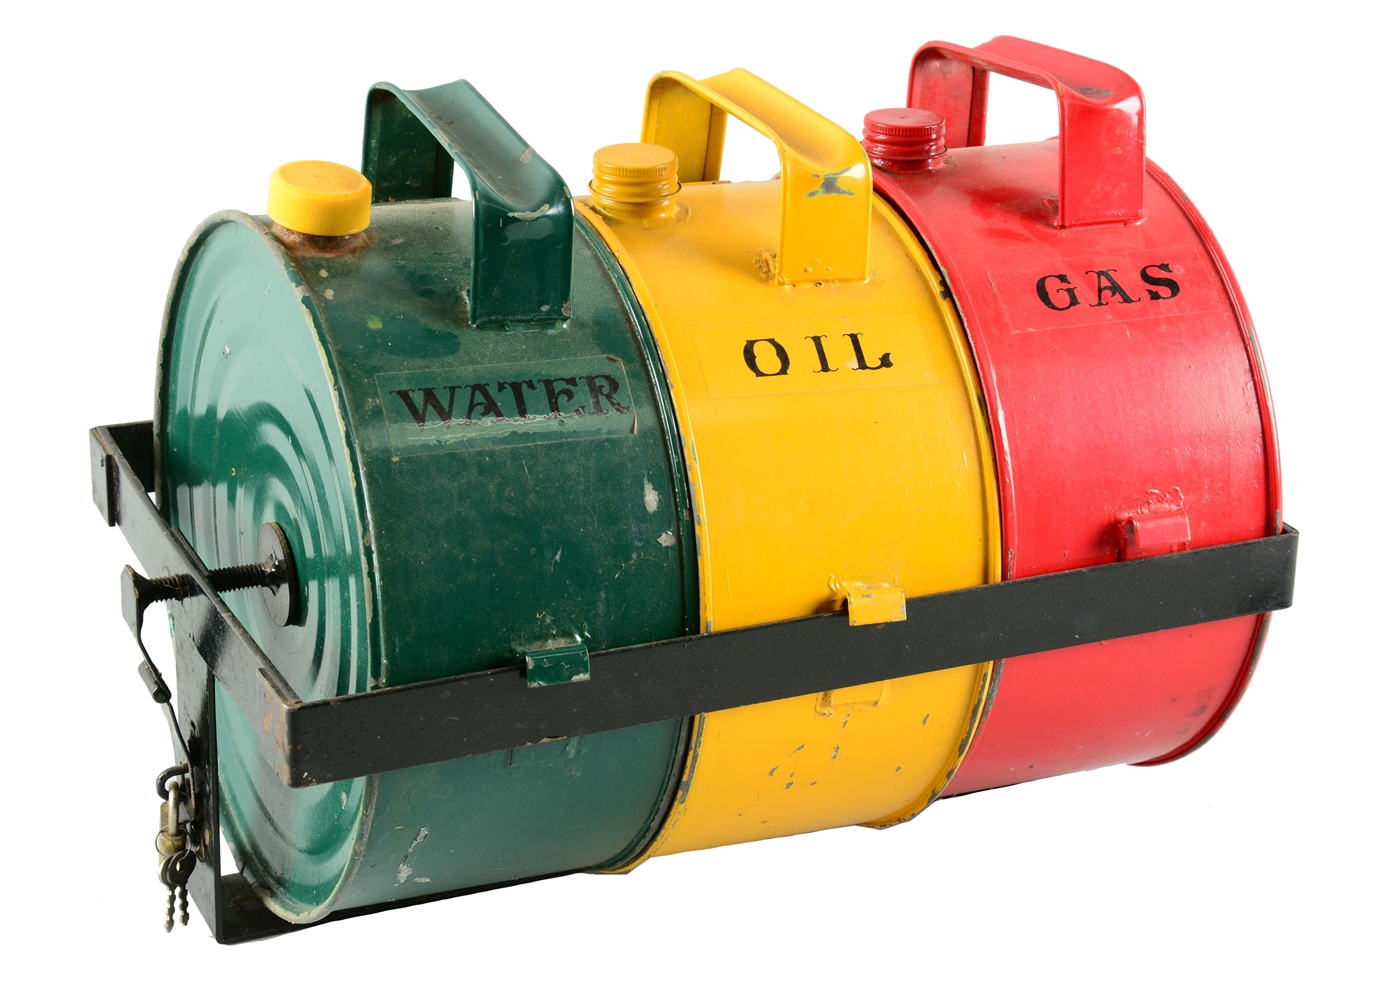 WATER, OIL AND GAS CANS FOR AN EARLY AUTOMOBILE. 